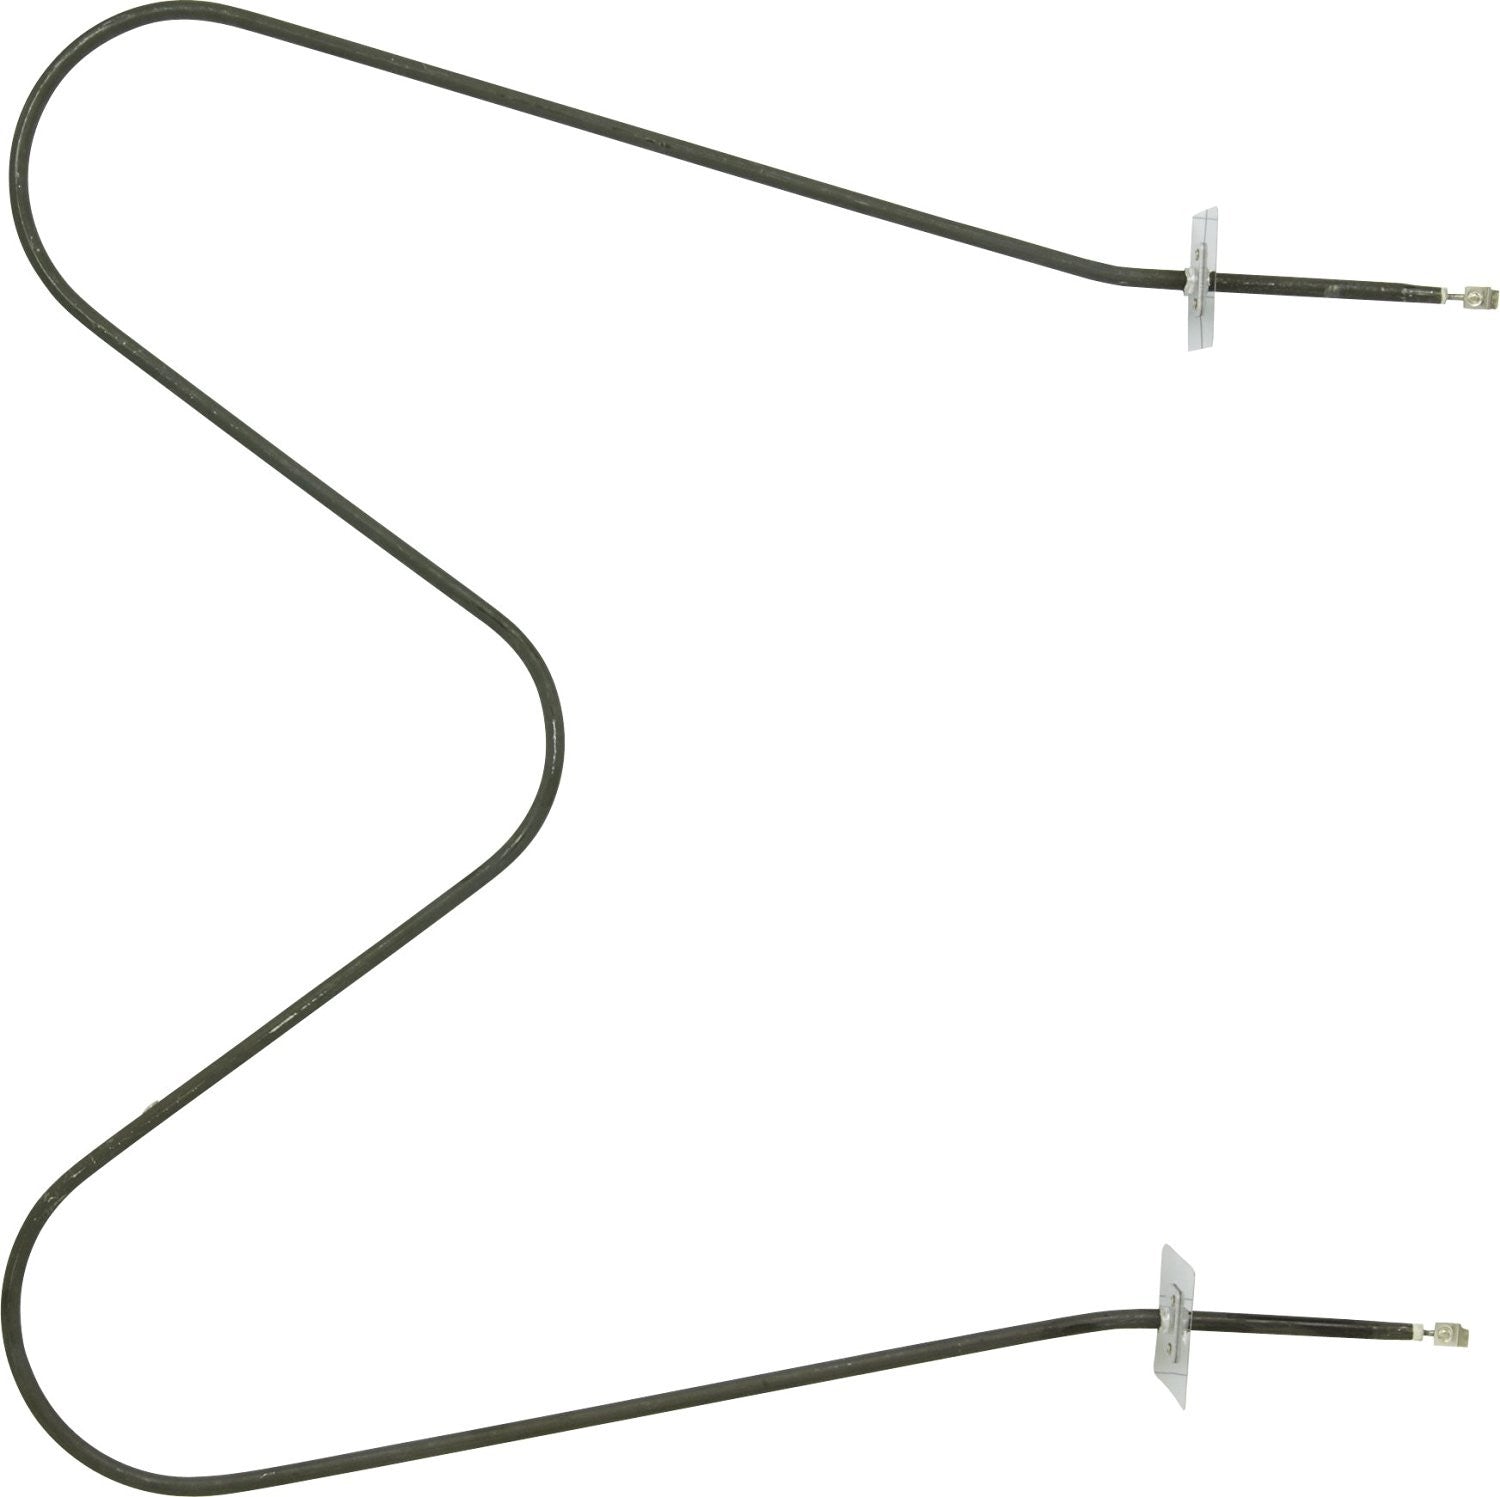 Frigidaire 5303051519 Oven Bake Heating Element Replacement